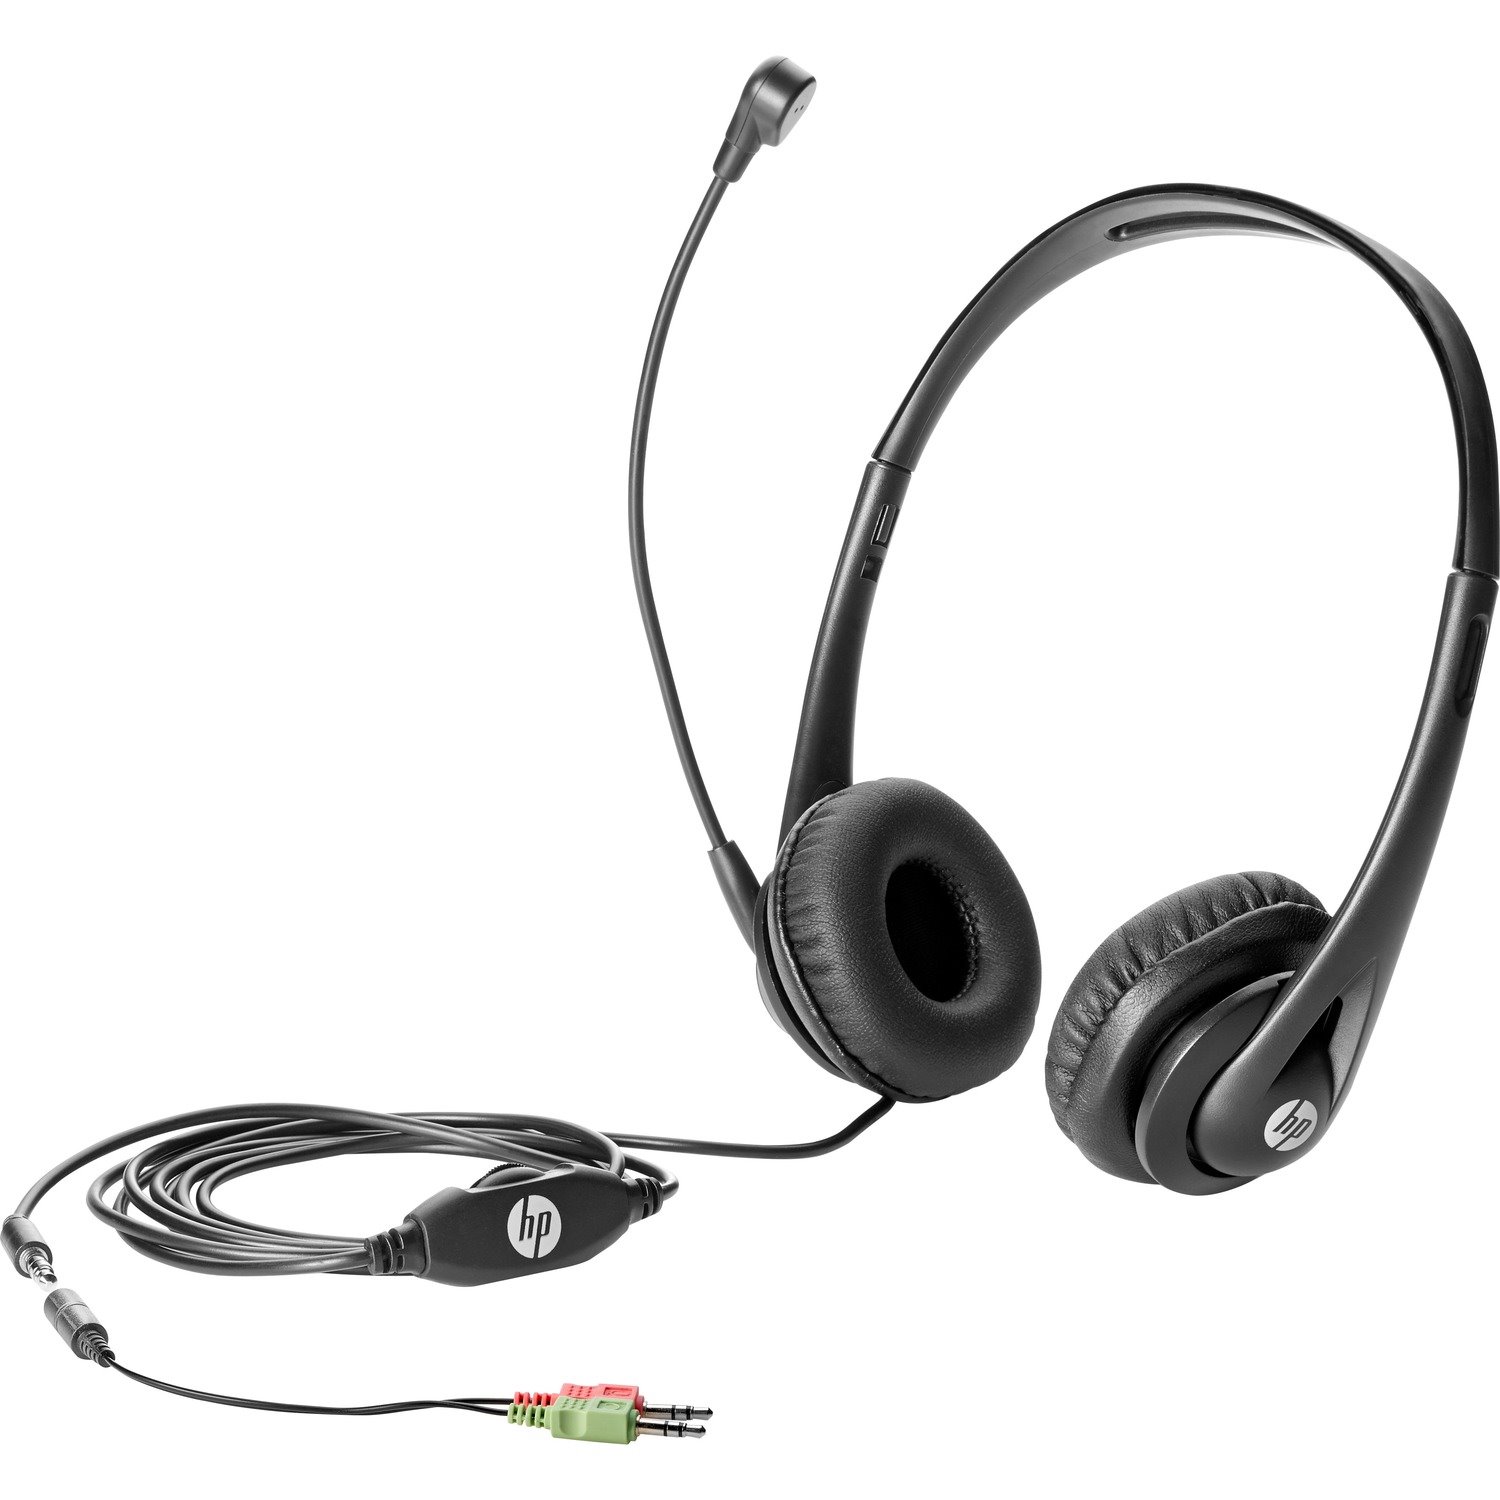 HP Business v2 Wired Over-the-head Stereo Headset - Black